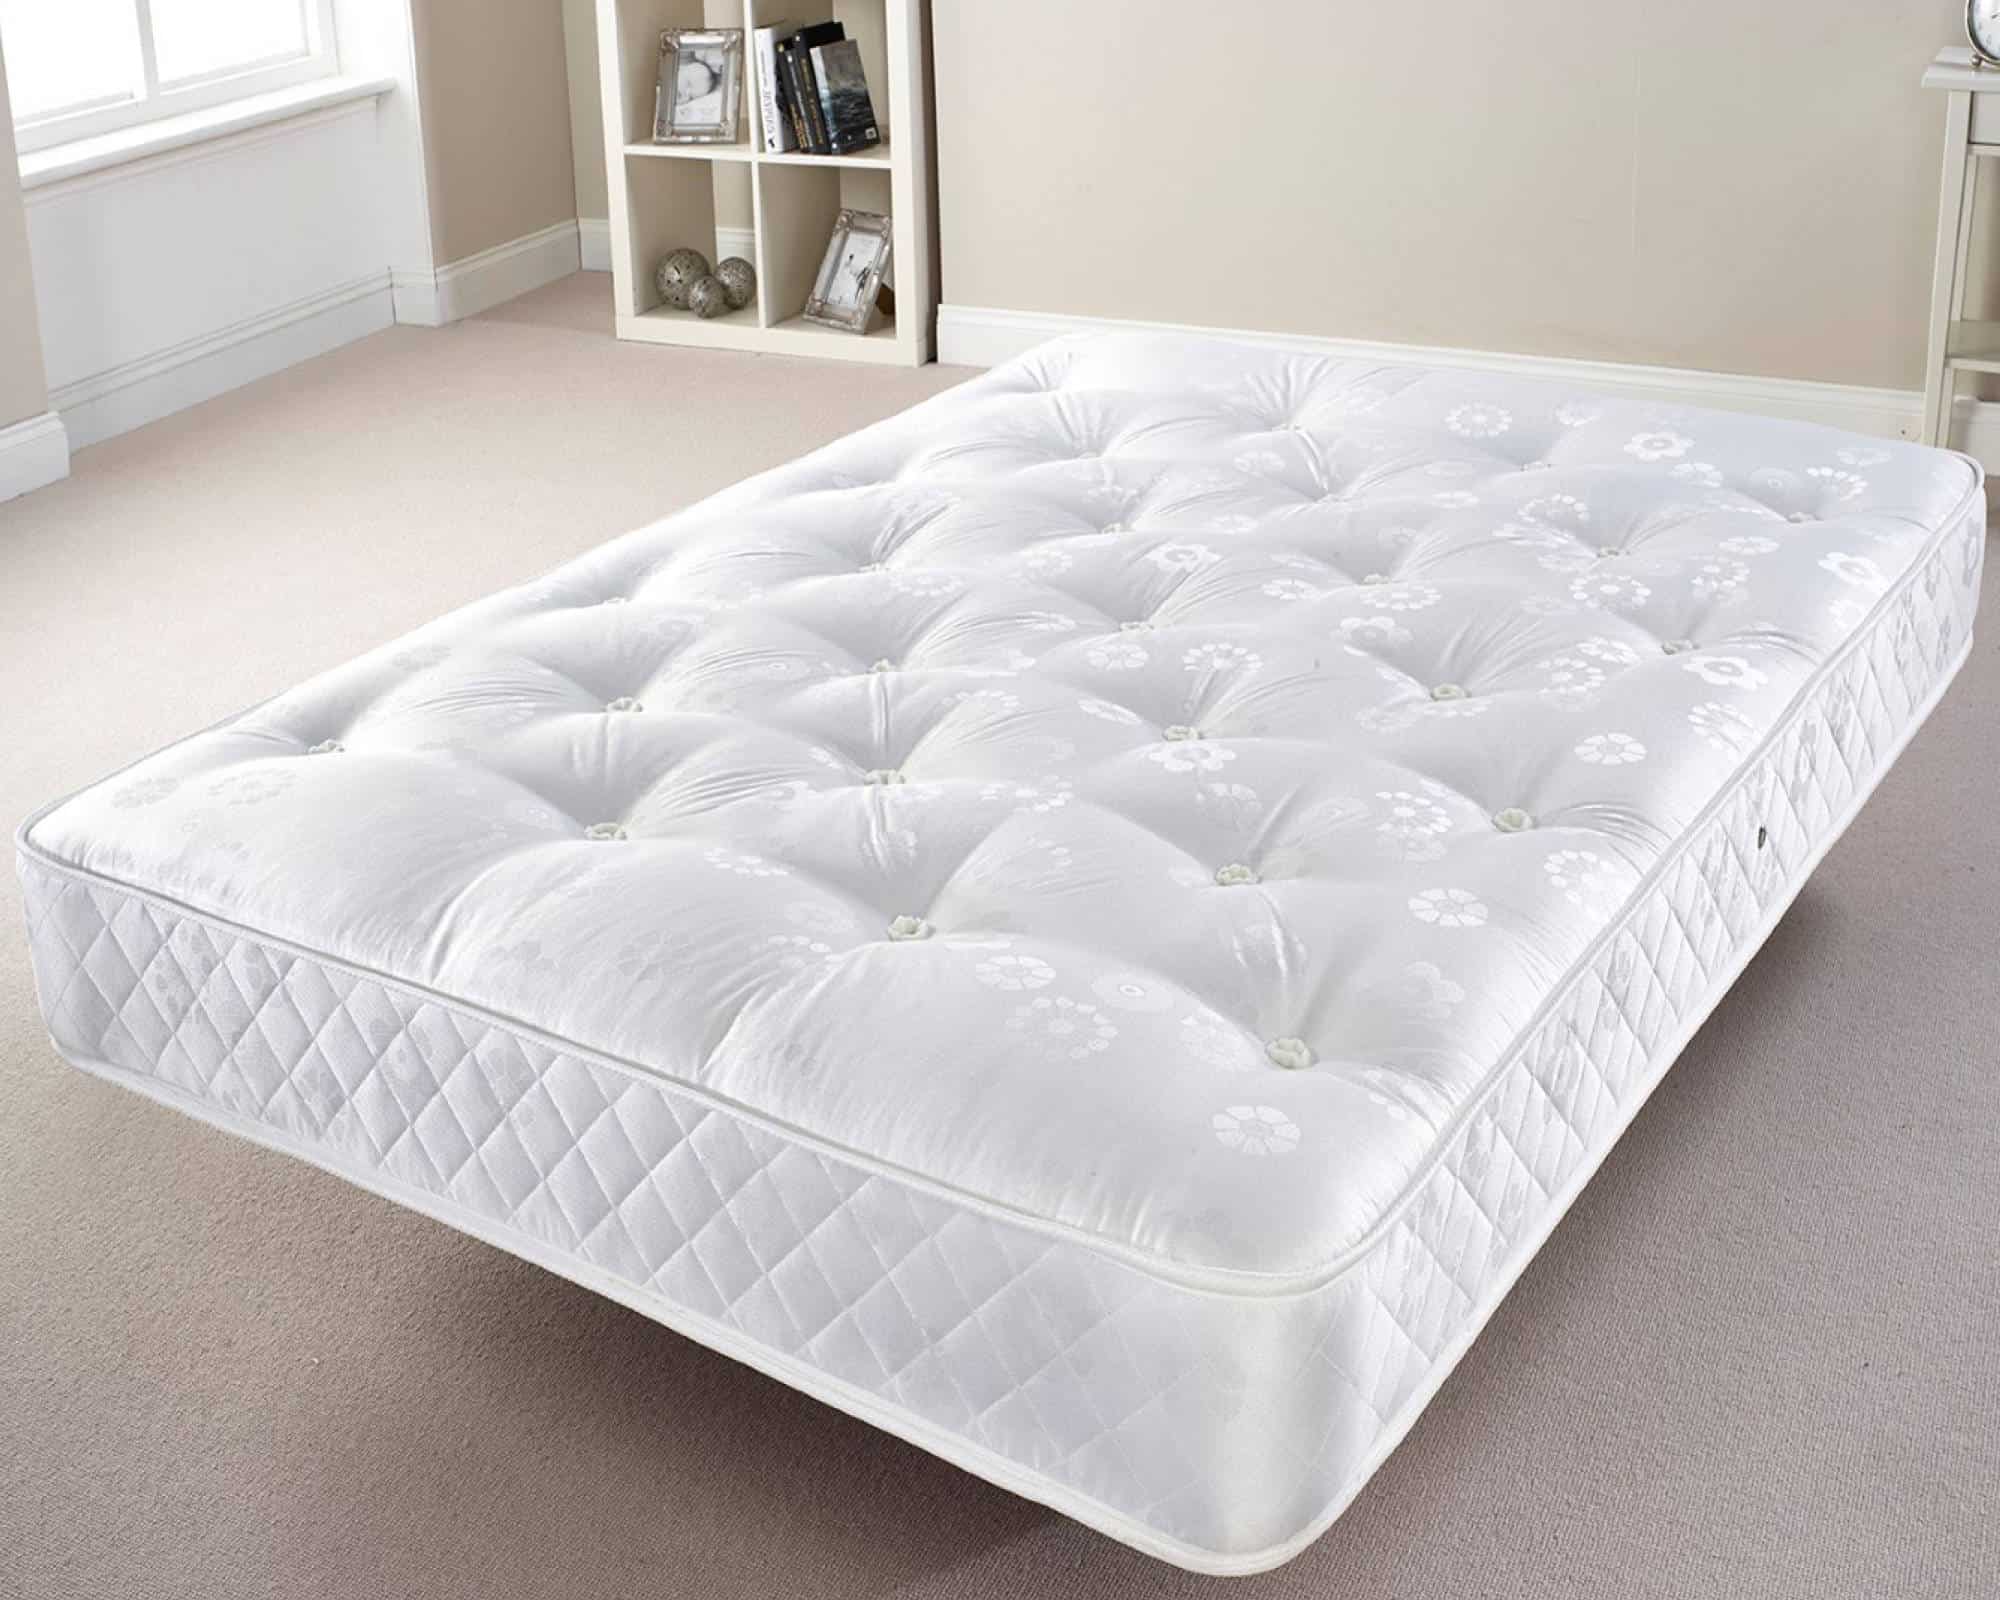 orthopedic mattress for 200 dollars queen size